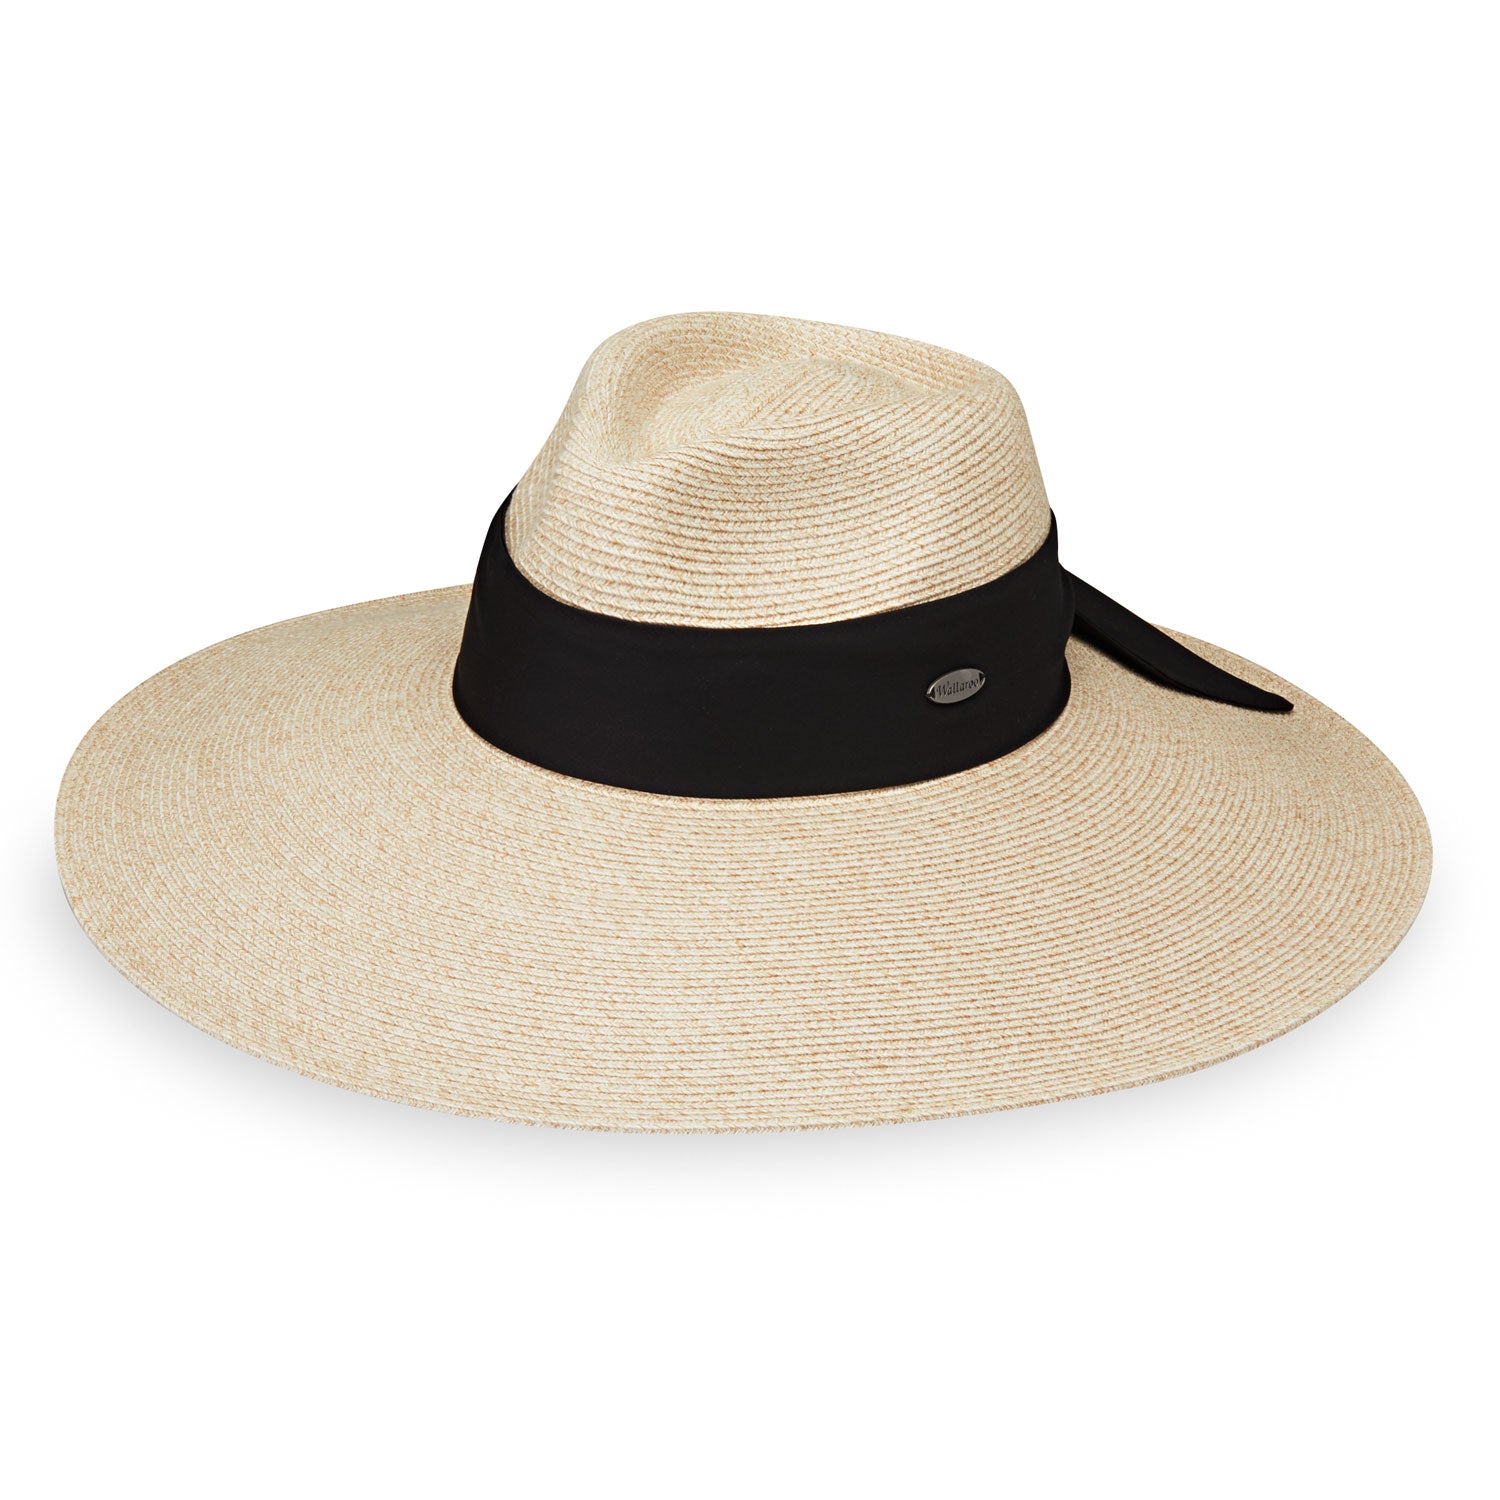 Featuring Front of Wide Brim Fedora Style Elise Sun Hat in White Beige from Wallaroo